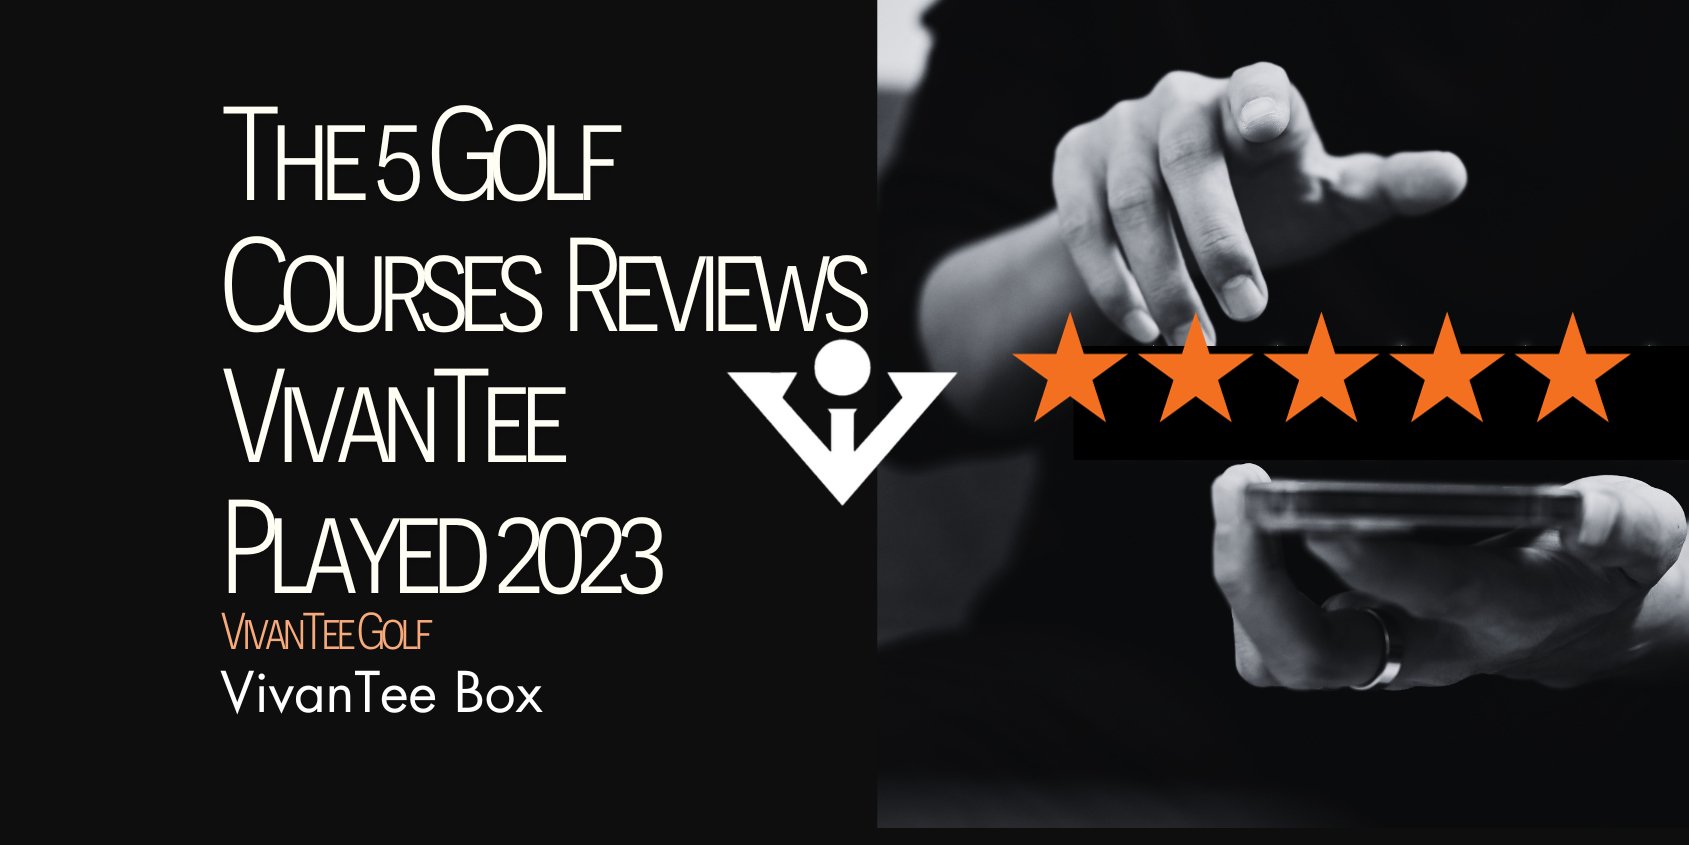 Our signature blog banner with VivanTee logo and a hand holding a phone showing 5 stars, to emphasize our golf course reviews covered in the article. 